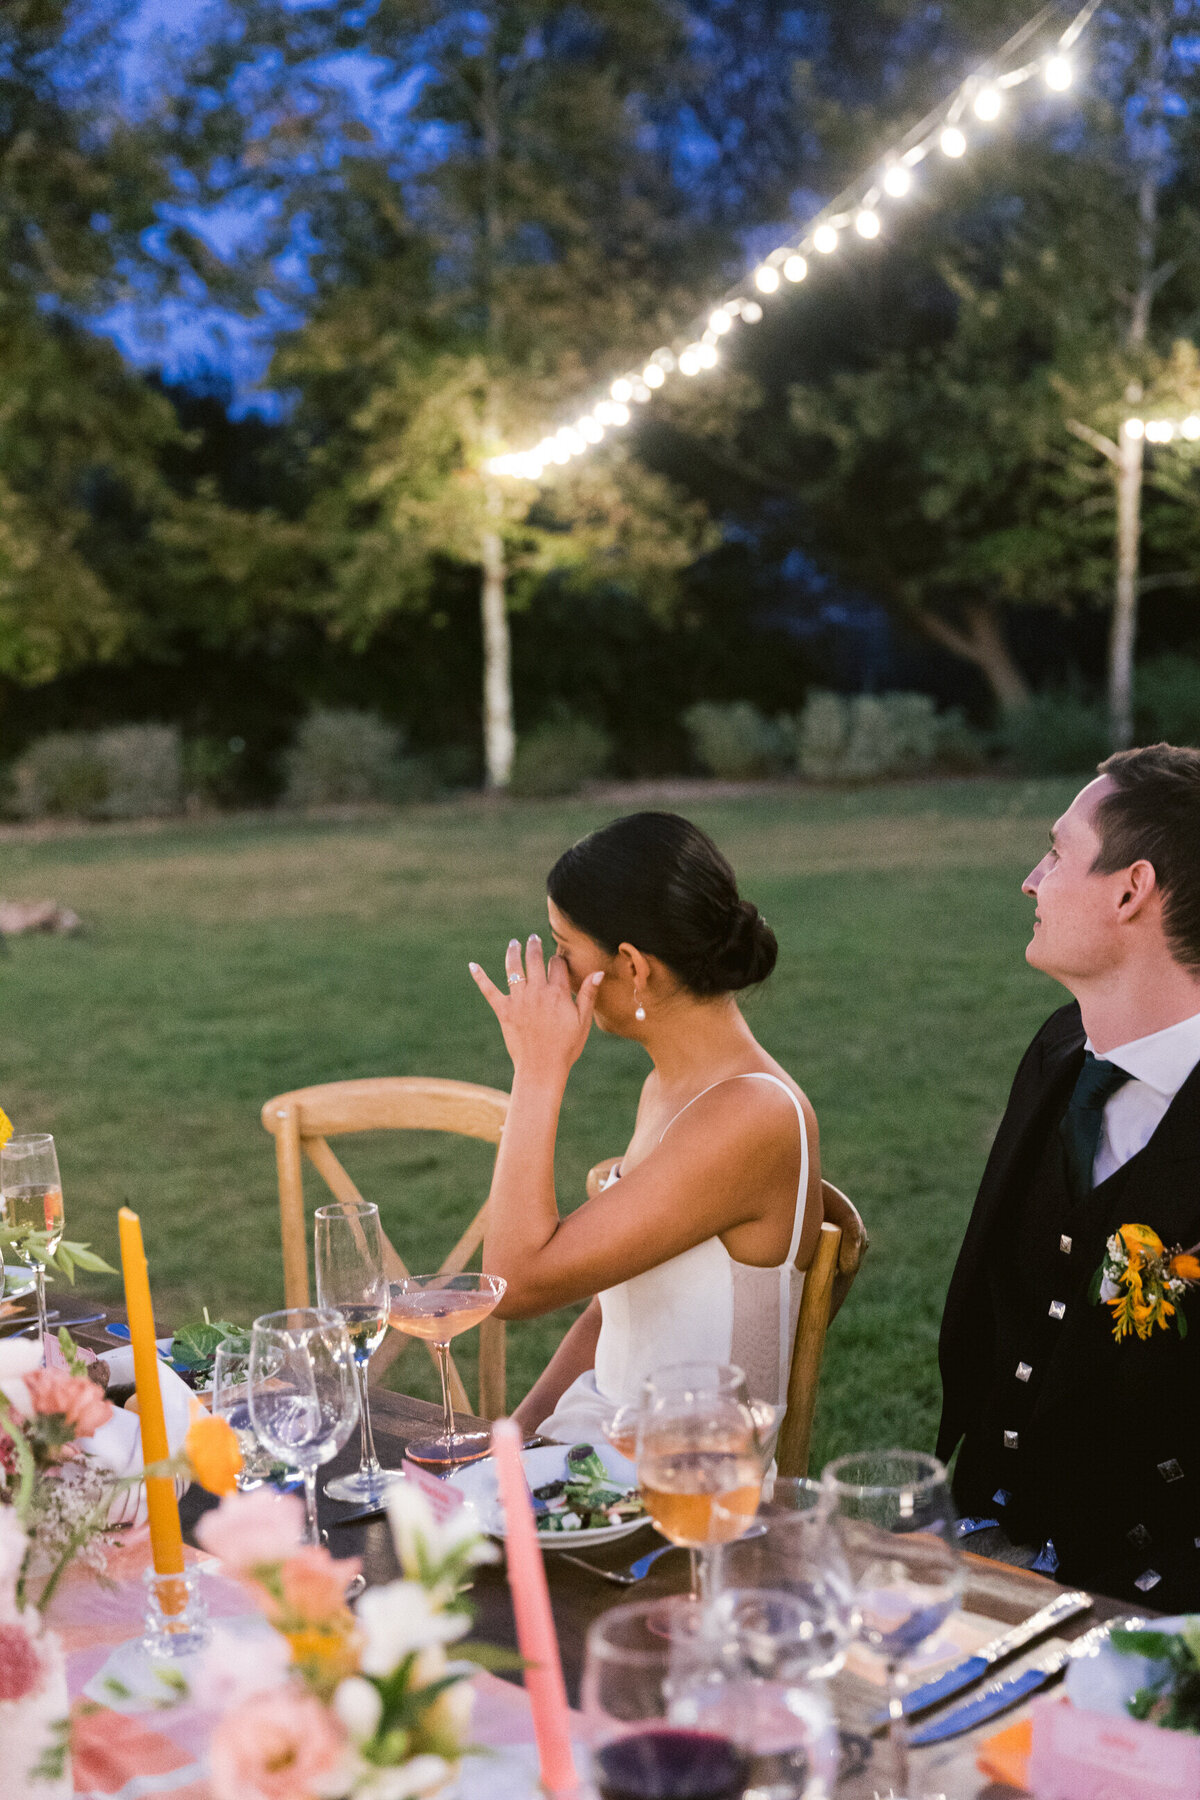 Angelica Marie Photography_Natalie Pirzad and Gordon Stewart Wedding_September 2022_The Lodge at Malibou Lake Wedding_Malibu Wedding Photographer_1913